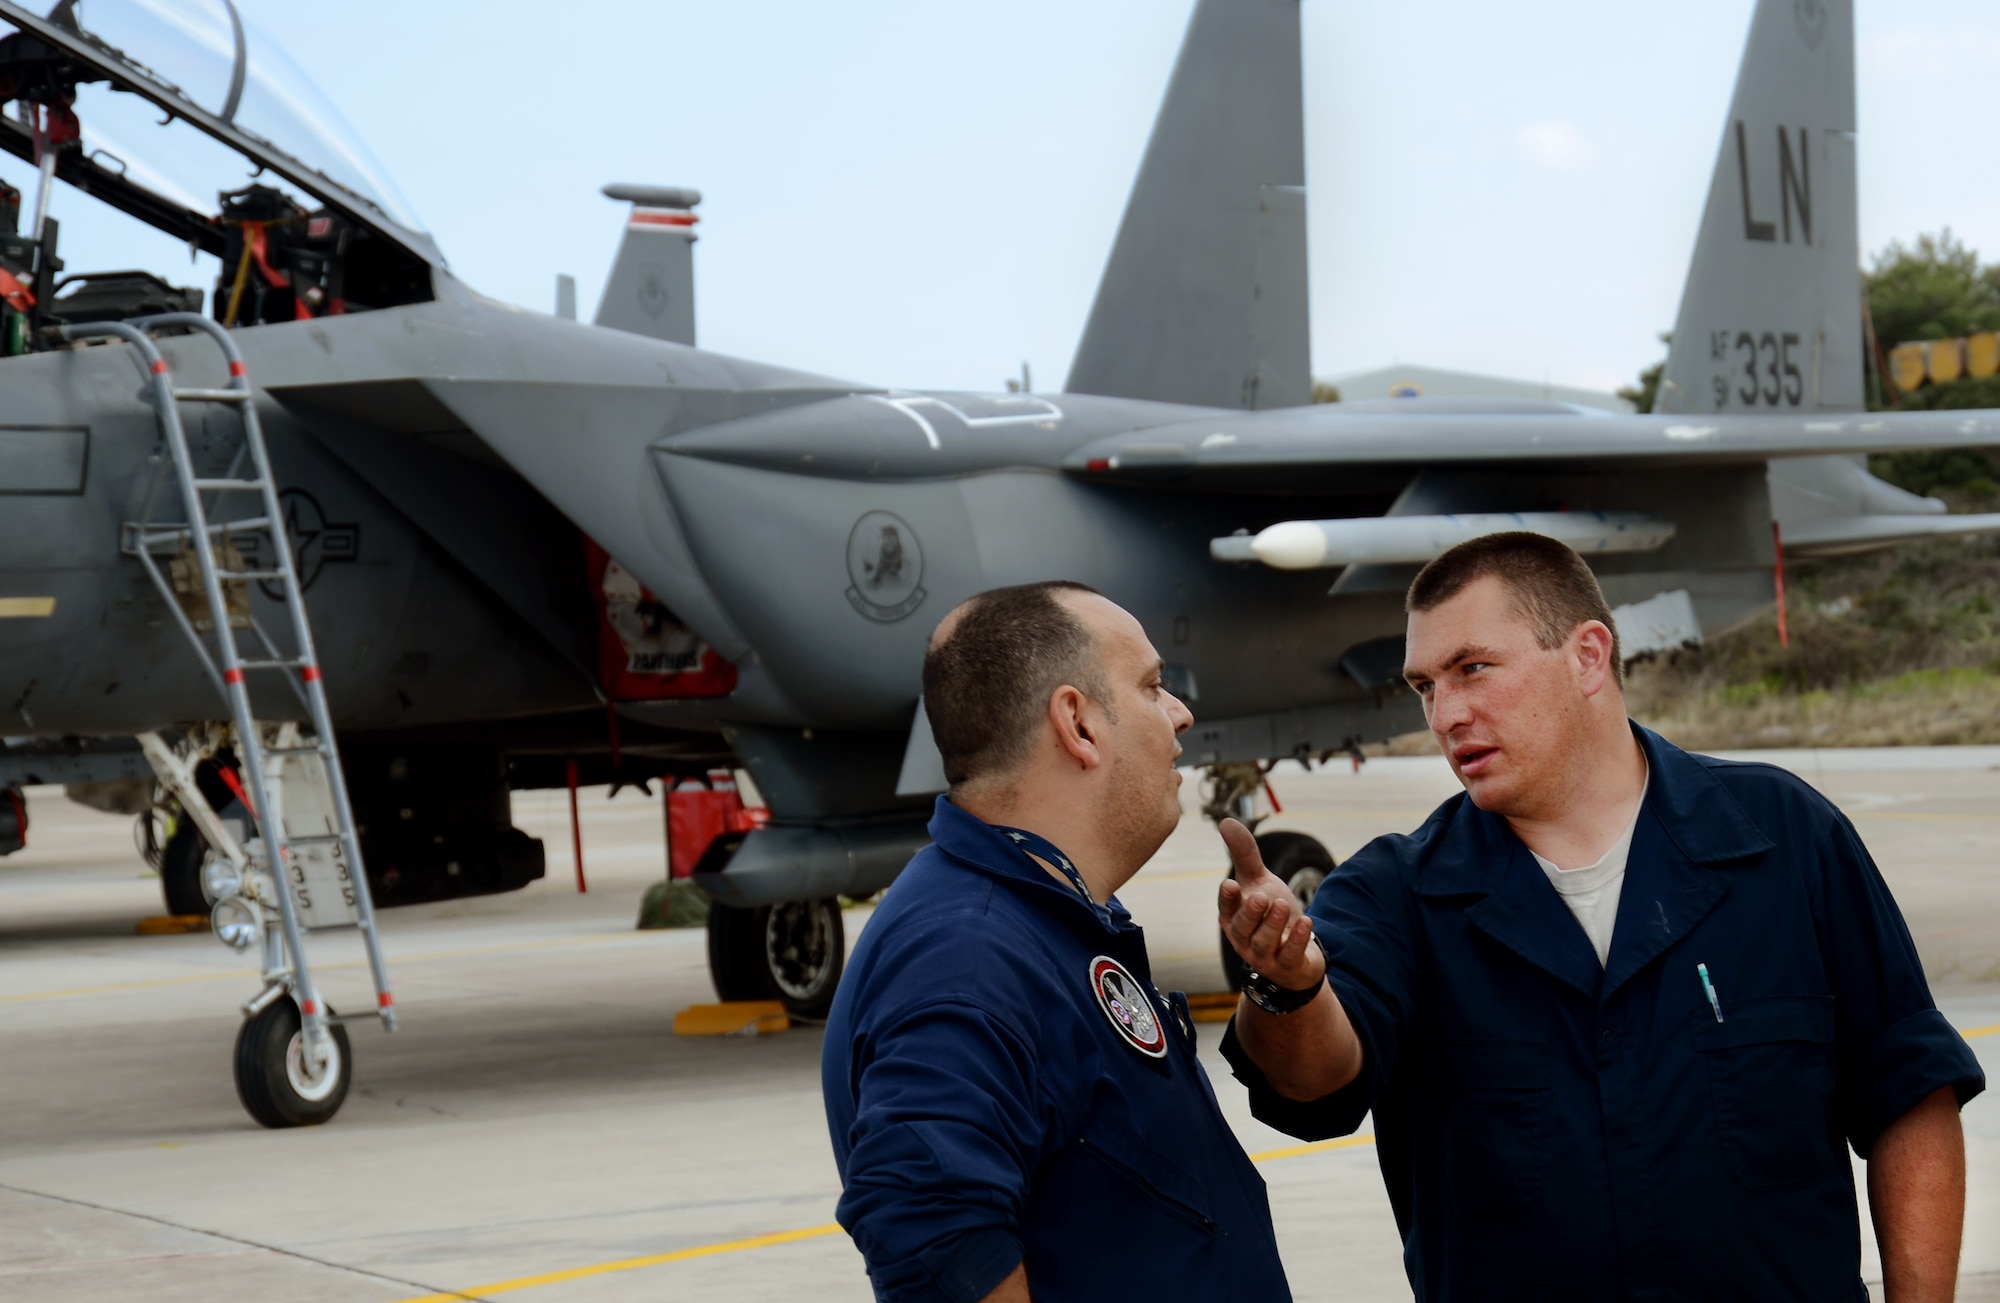 Hellenic air force Chief Master Sgt. Siogkas Christos, aircrew life support, receives an F-15E Strike Eagle orientation tour from Staff Sgt. Trevor Wabel, 494th Expeditionary Fighter Squadron crew chief, at Souda Air Base, Greece, during a flying training deployment, Feb. 27, 2014. Military relations between the U.S. and Greece date back to the early 19th century, when Greece was fighting for independence, as the two nations found commonality under their values of freedom and democracy. (U.S. Air Force photo by Staff Sgt. Thomas Trower/Released)